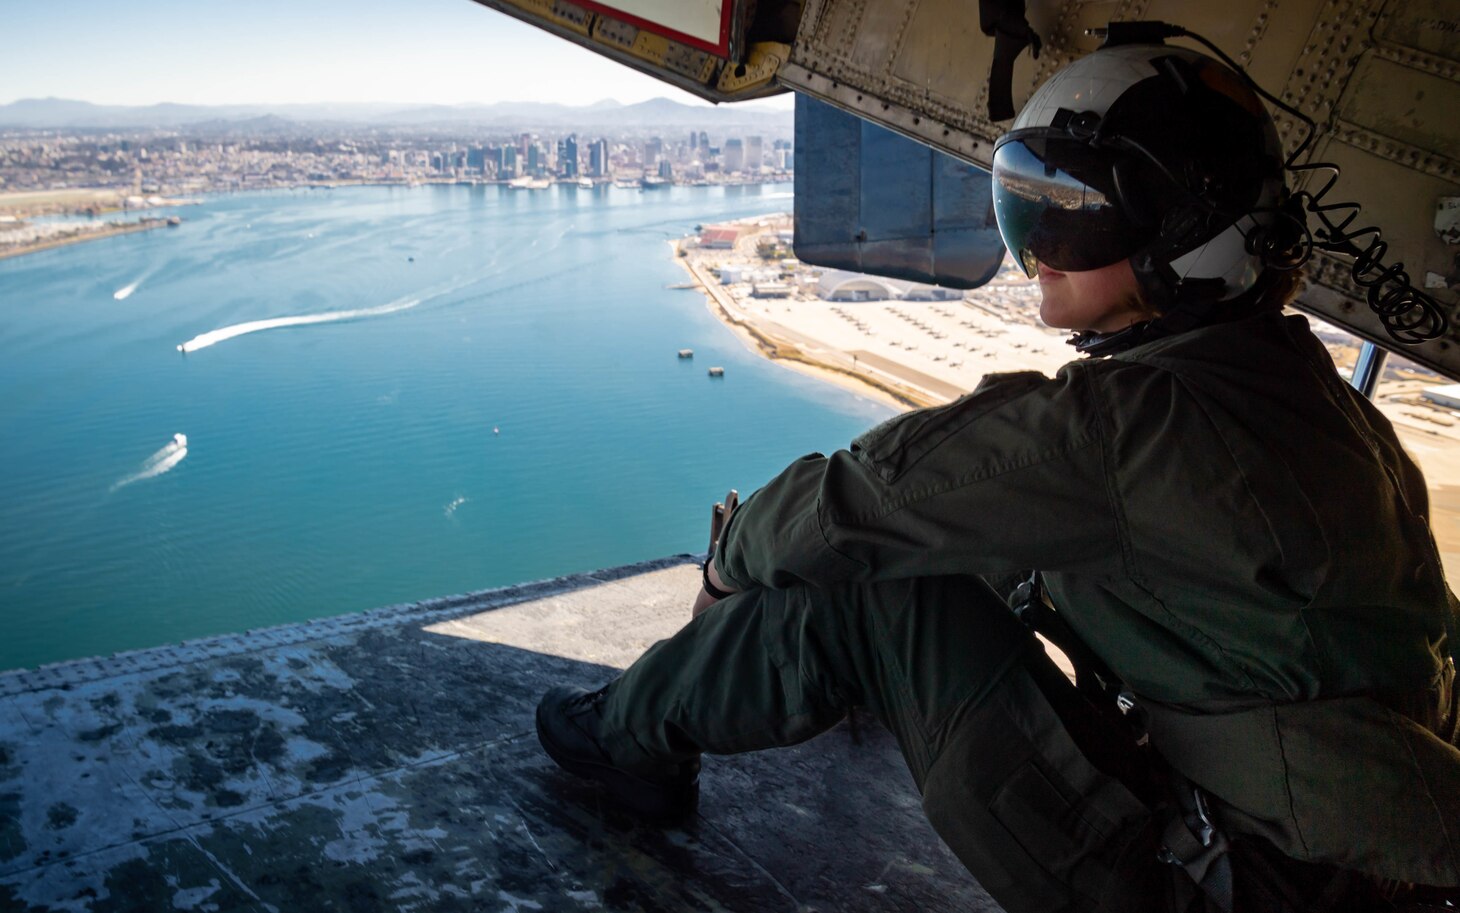 Naval Air Crewman (Mechanical) 2nd Class Erin Cass, a native of Horsham, Pa., assigned to the "Providers" of Fleet Logistics Support Squadron (VRC) 30, observes San Diego from the cargo ramp of a C-2A Greyhound.